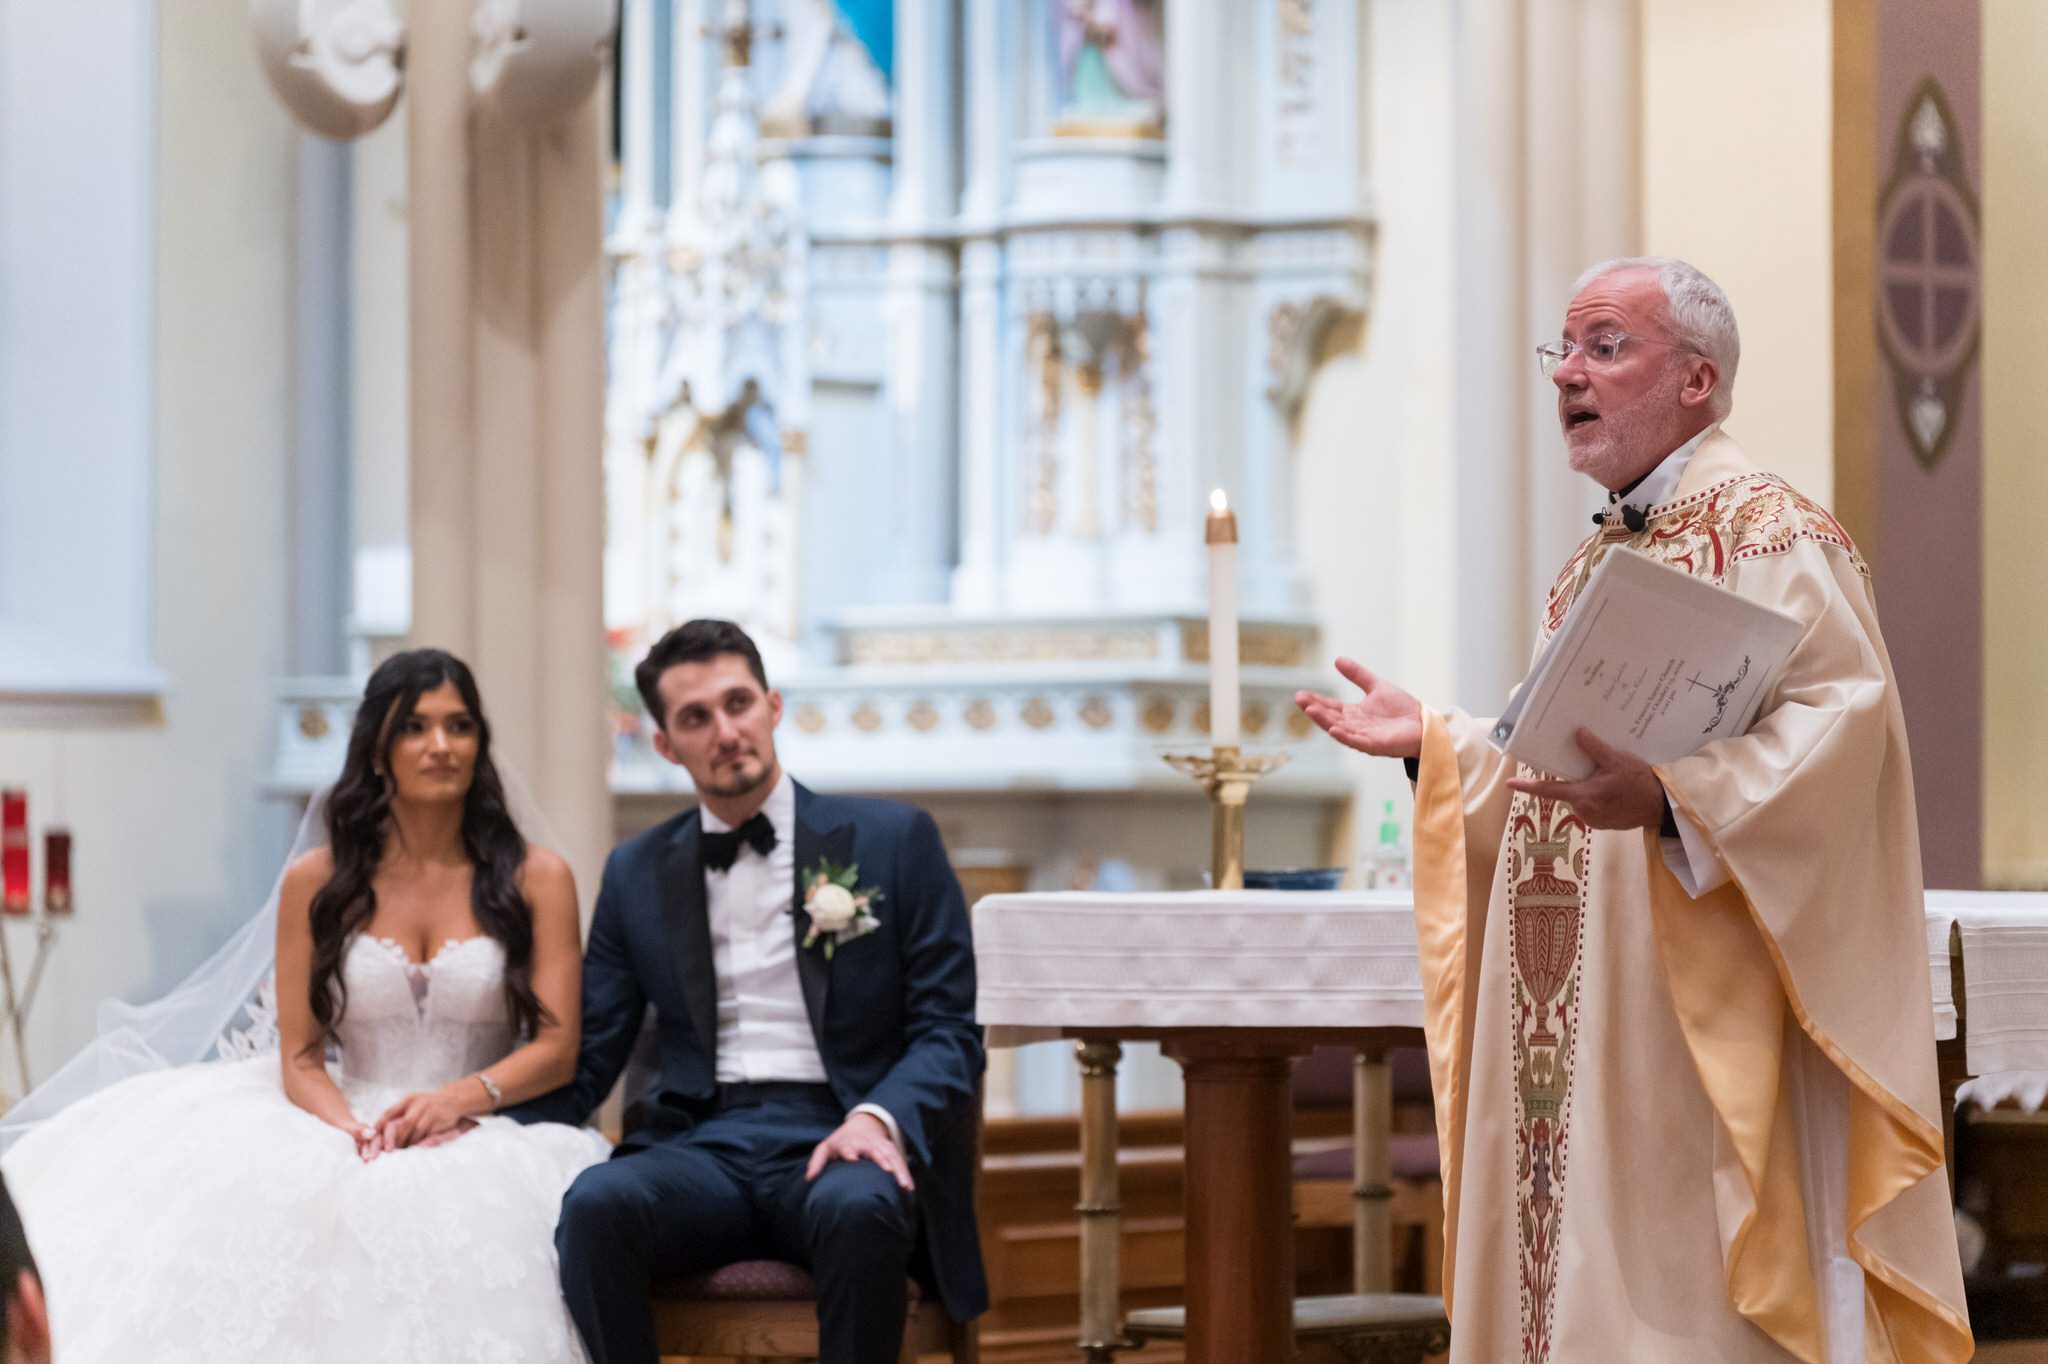 A priest delivers a wedding day homily at St. Francis Xavier church in Petoskey, MI. 